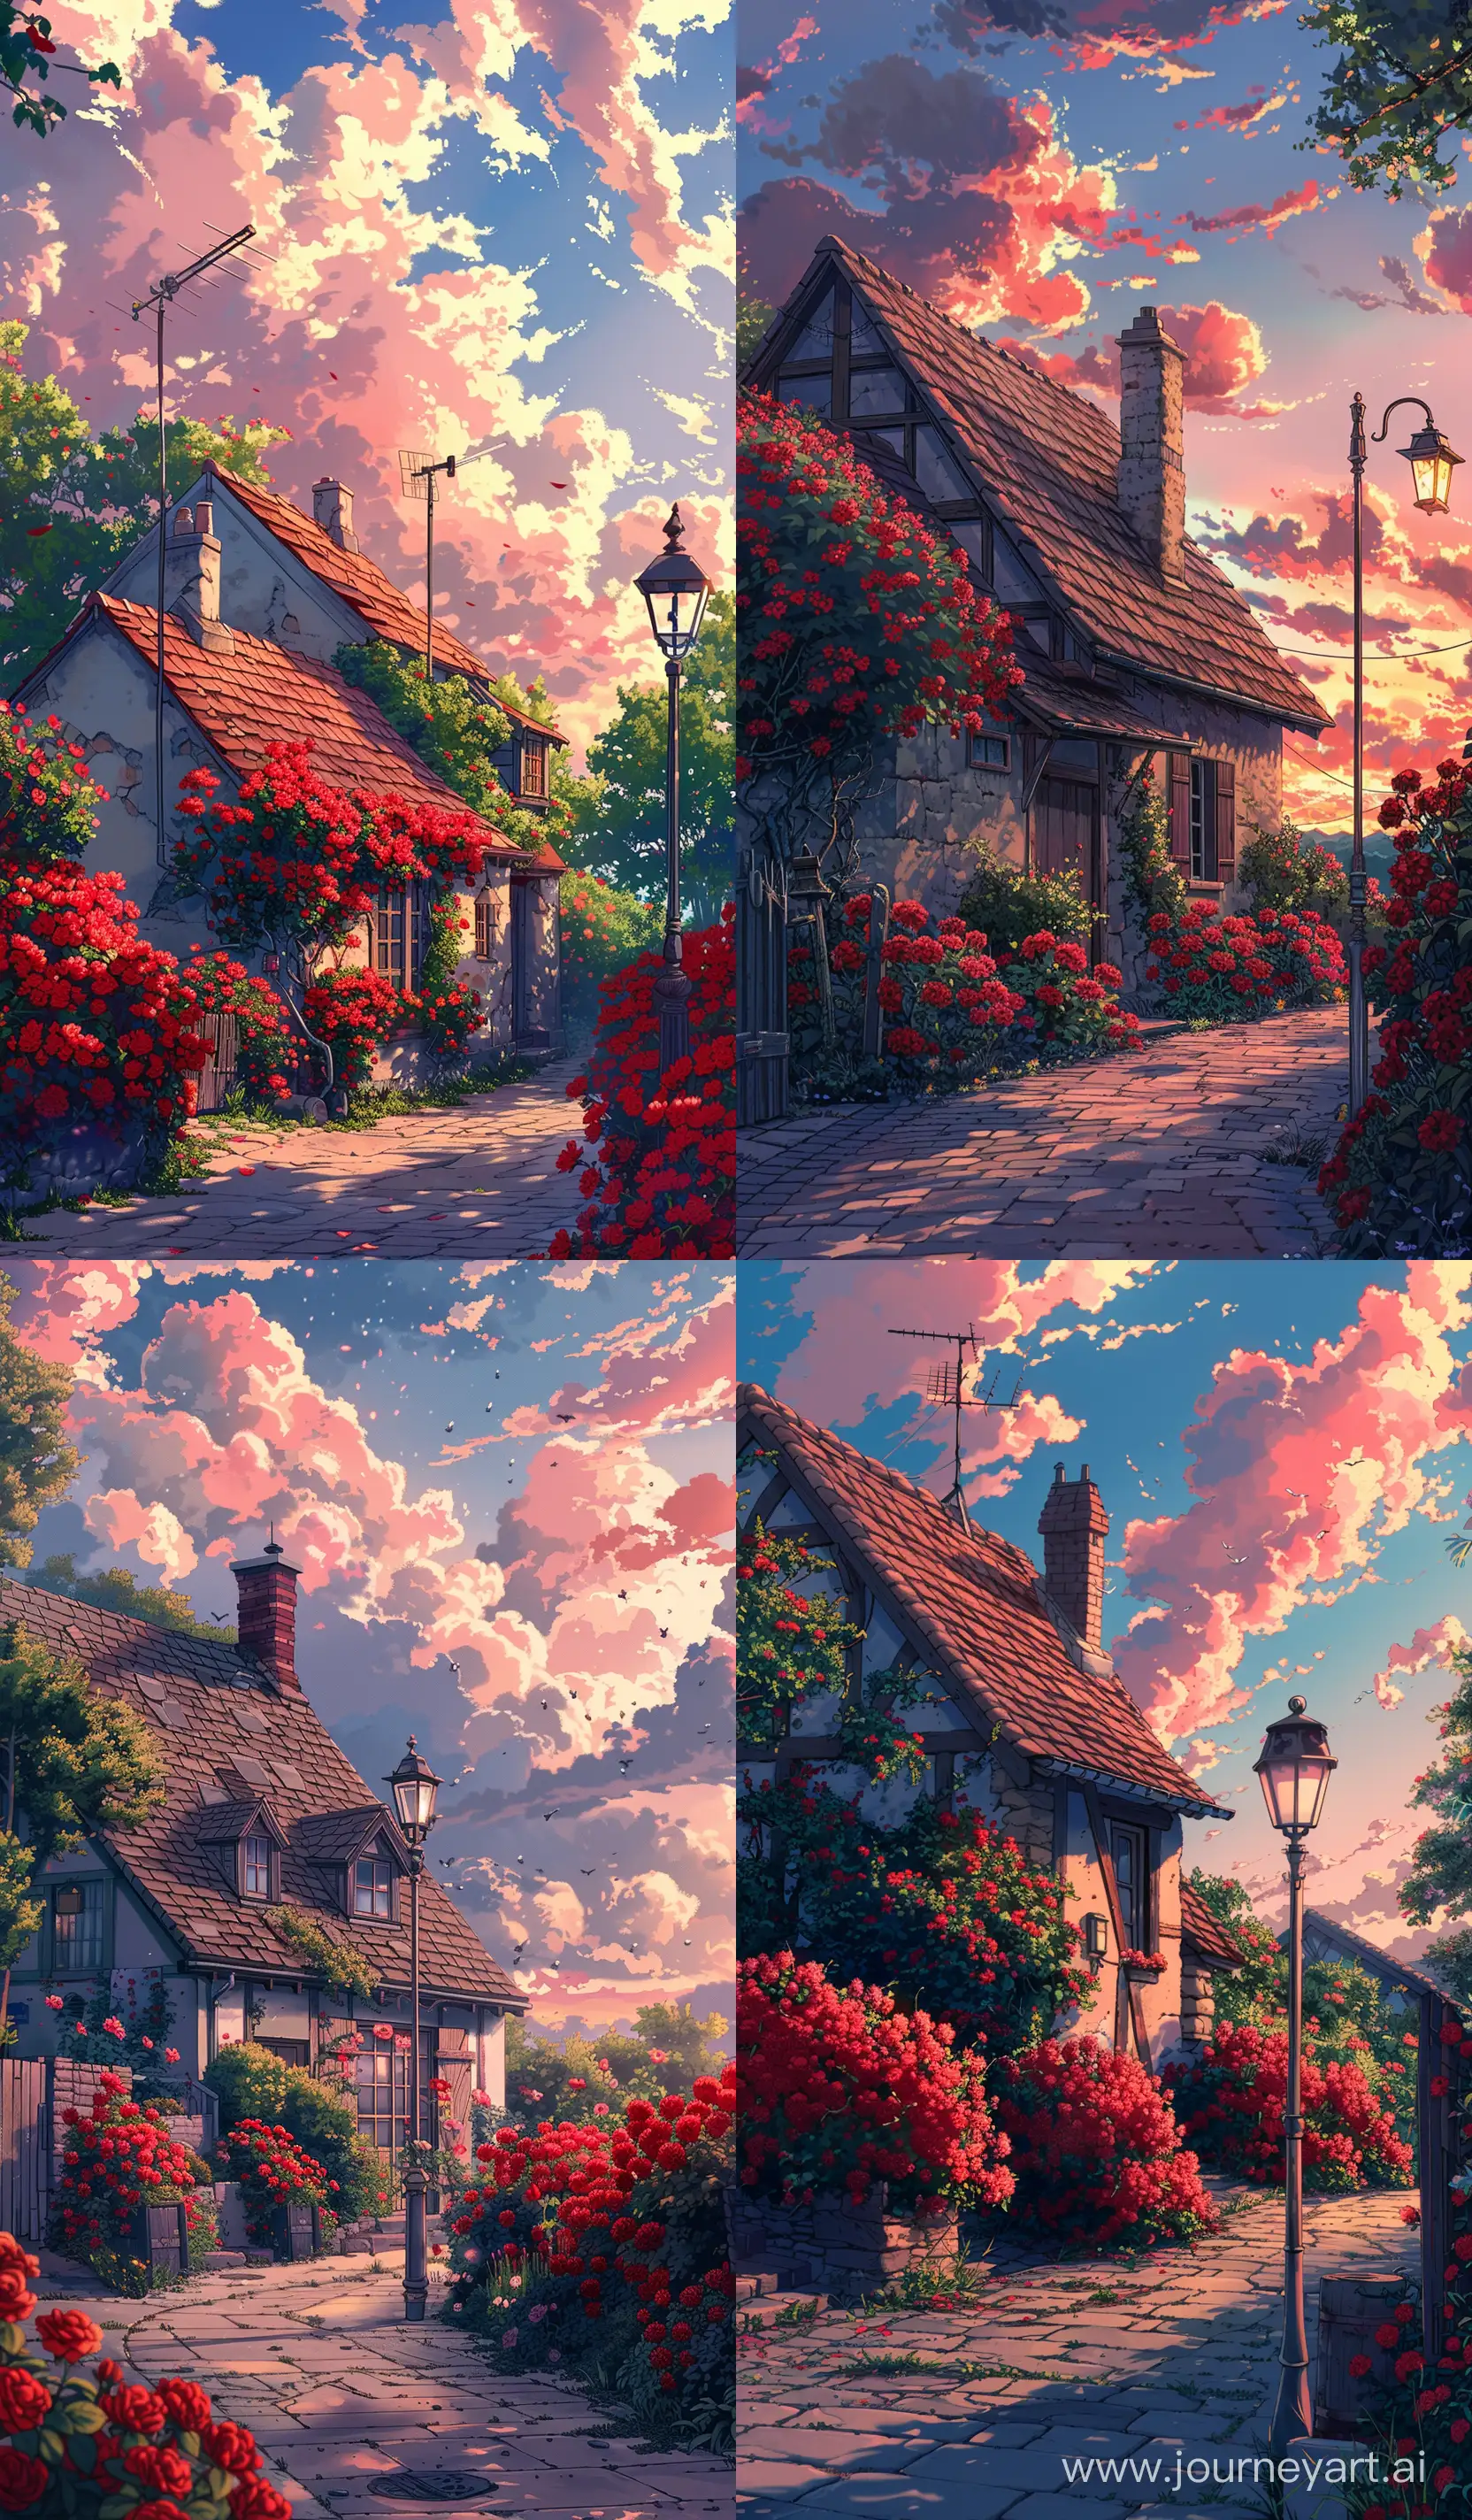 Anime-Scenery-French-Countryside-Cottage-with-Red-Flowers-and-Old-Lamp-Post